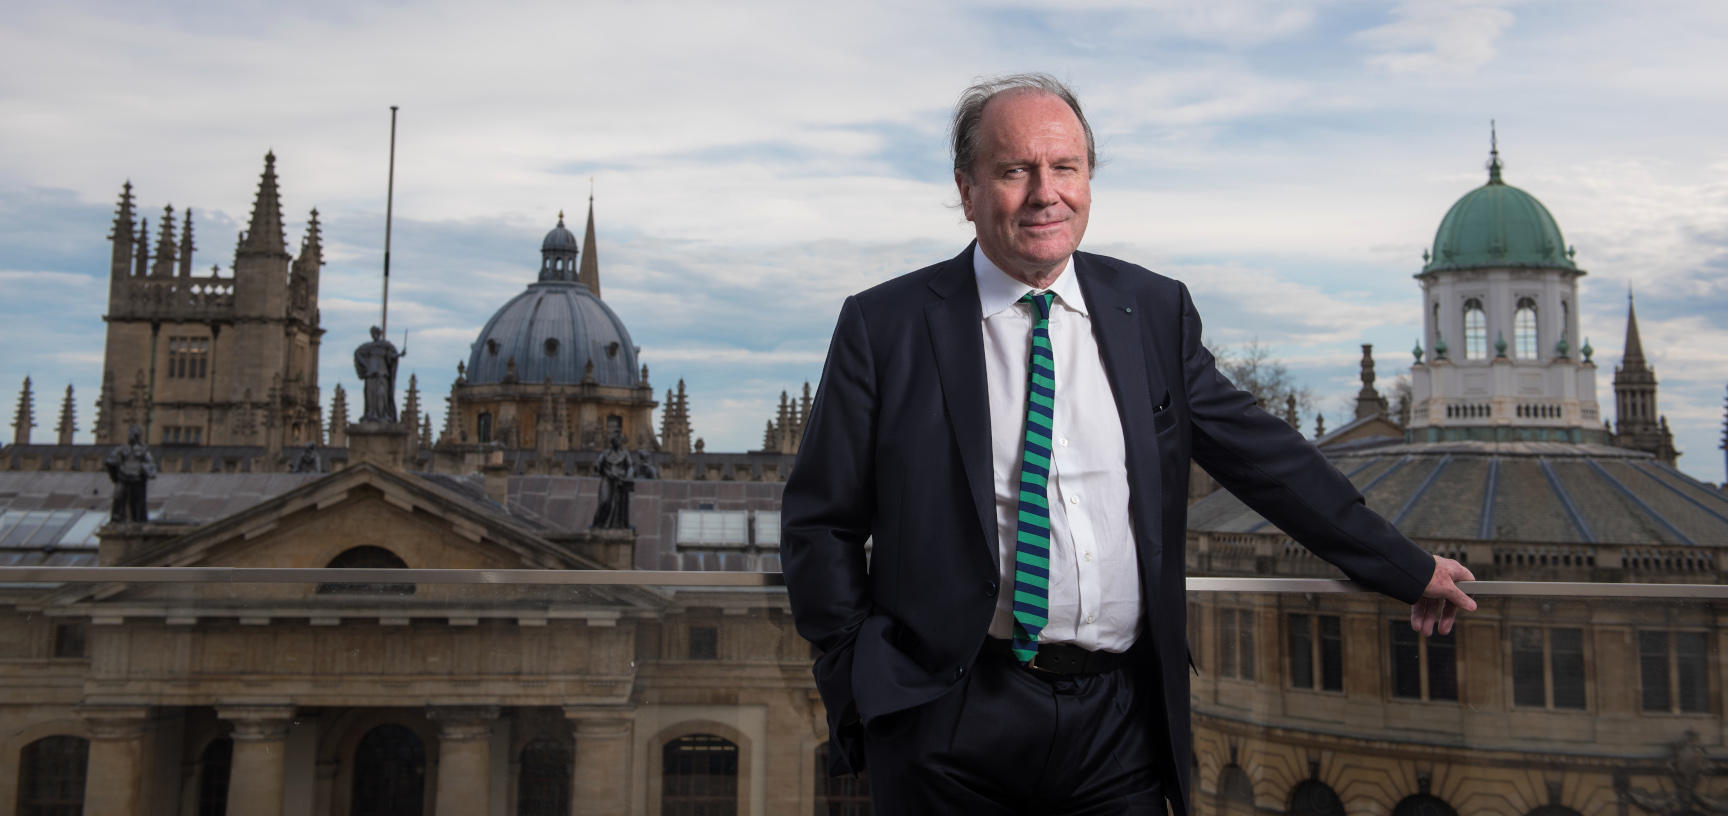 William Boyd stands on a balcony in front of the Oxford skyline